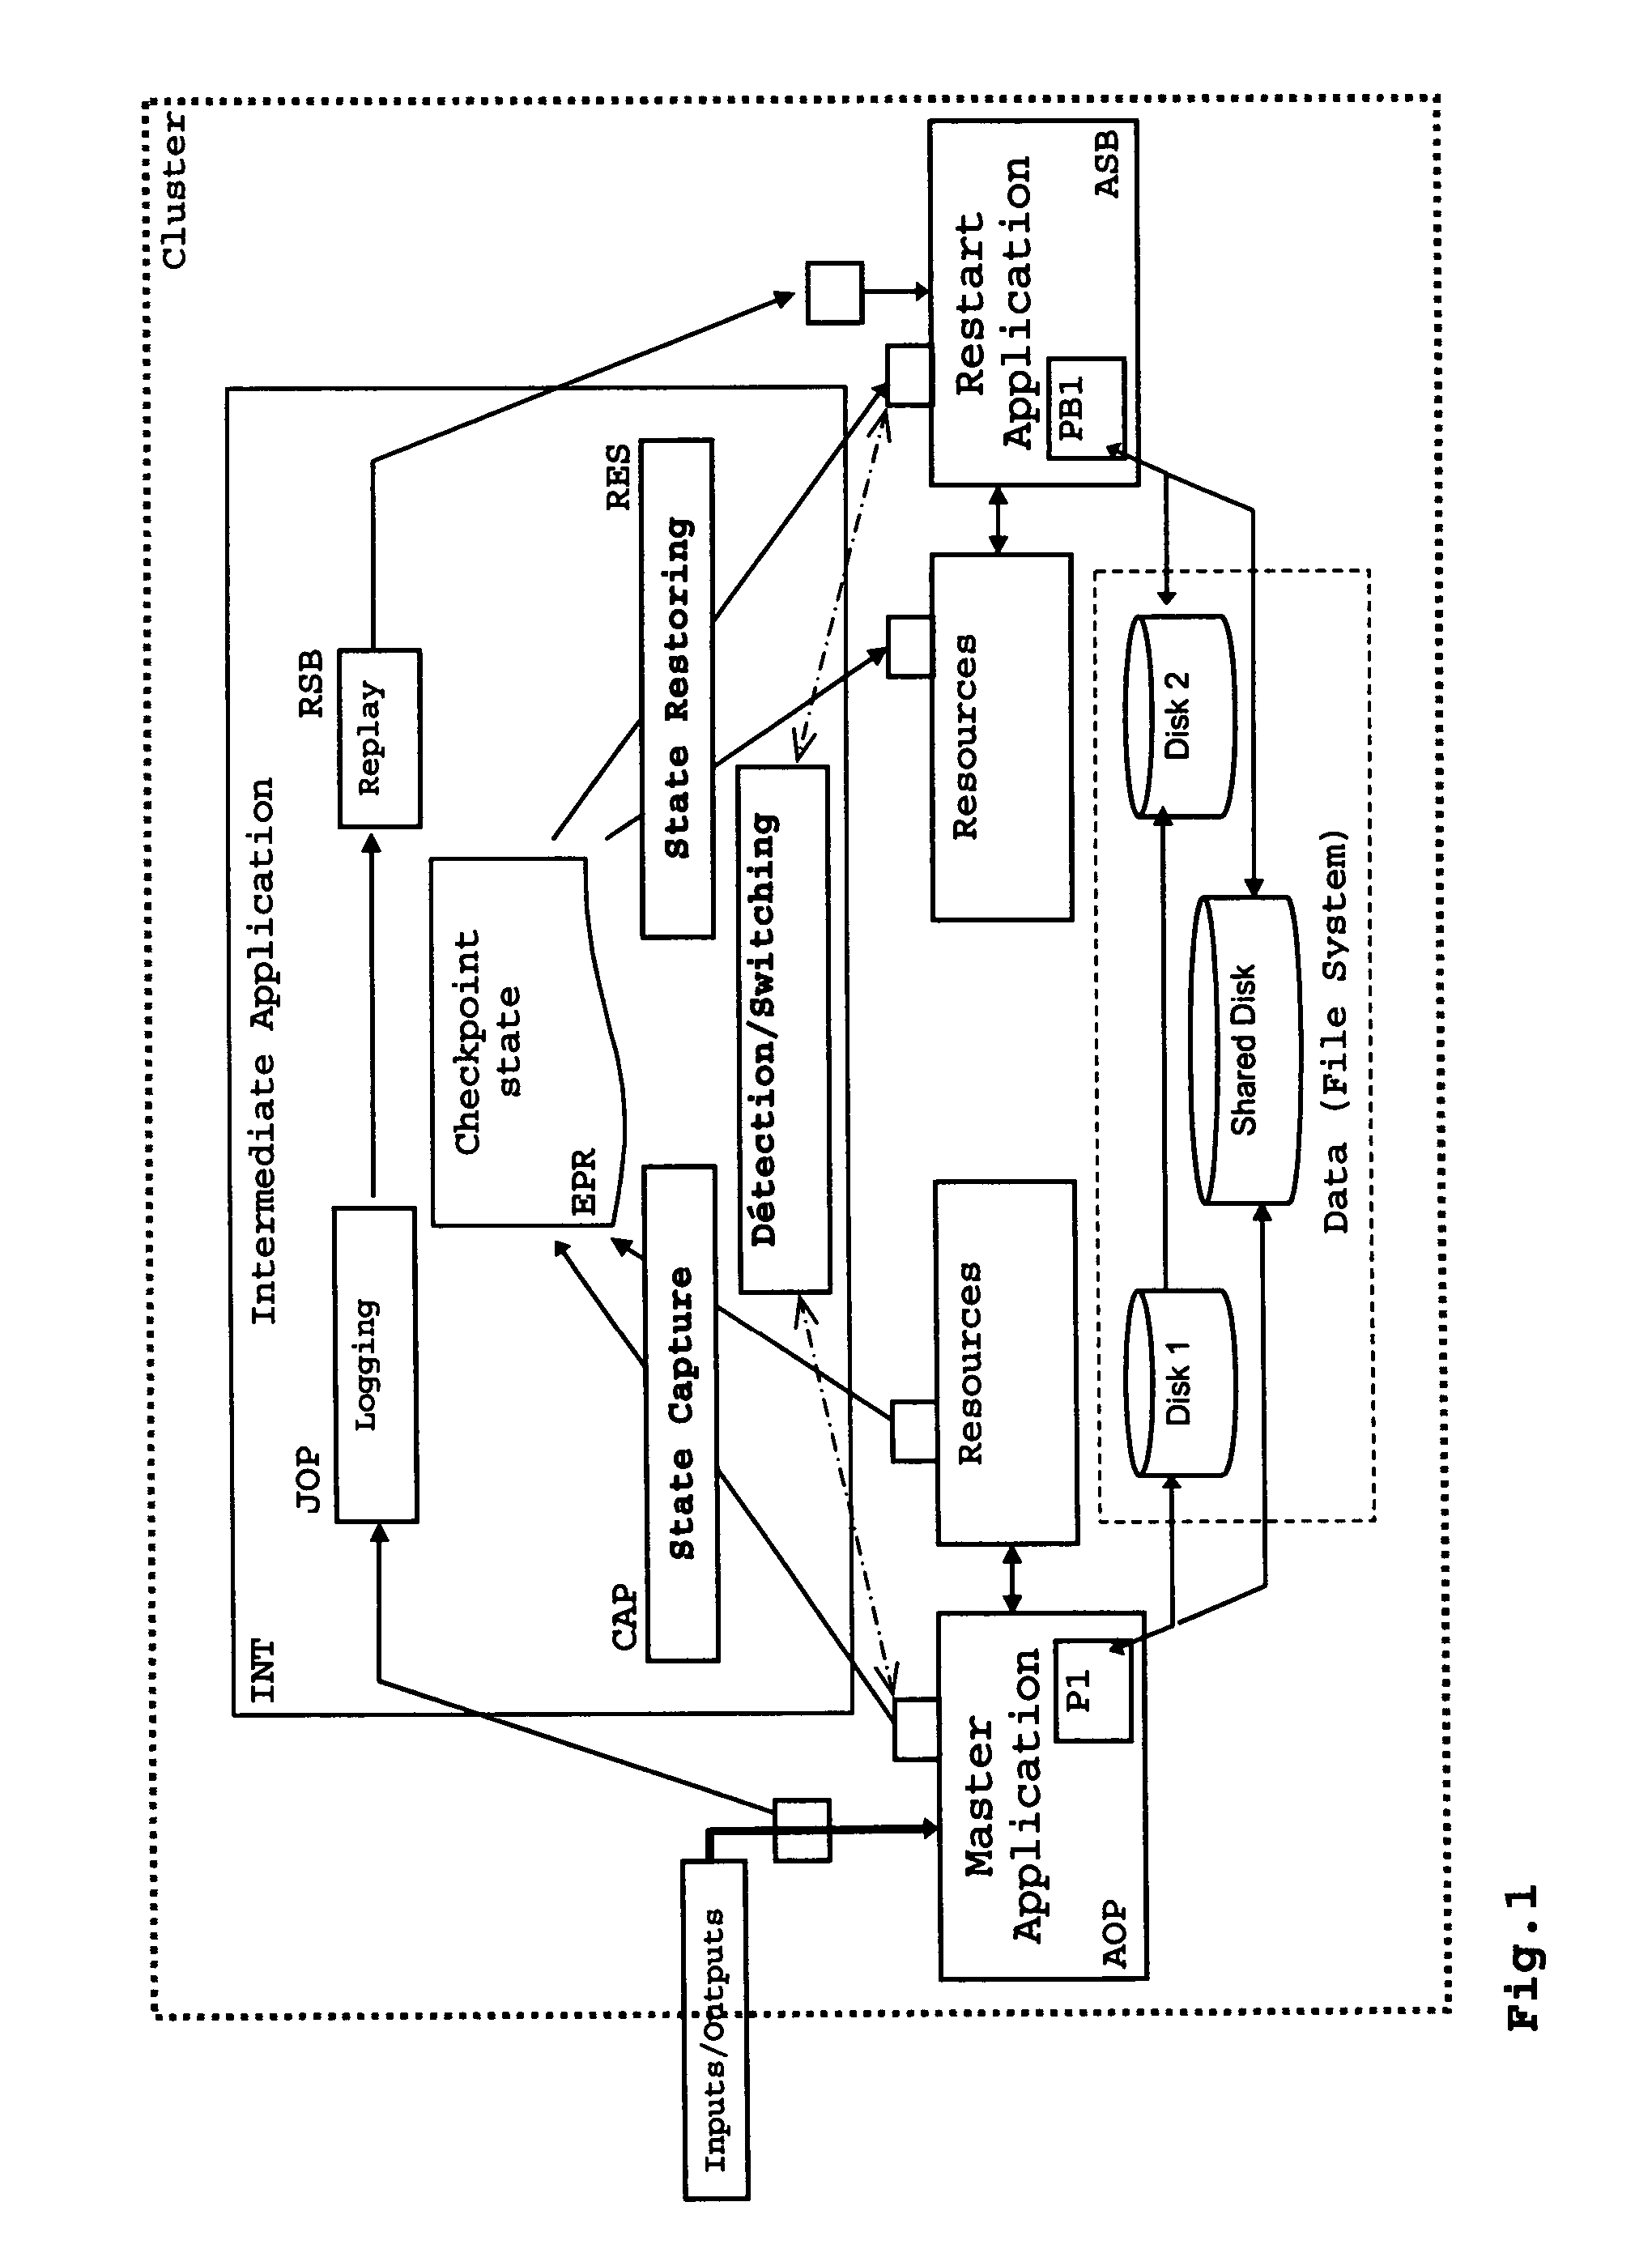 Non-intrusive method for logging external events related to an application process, and a system implementing said method